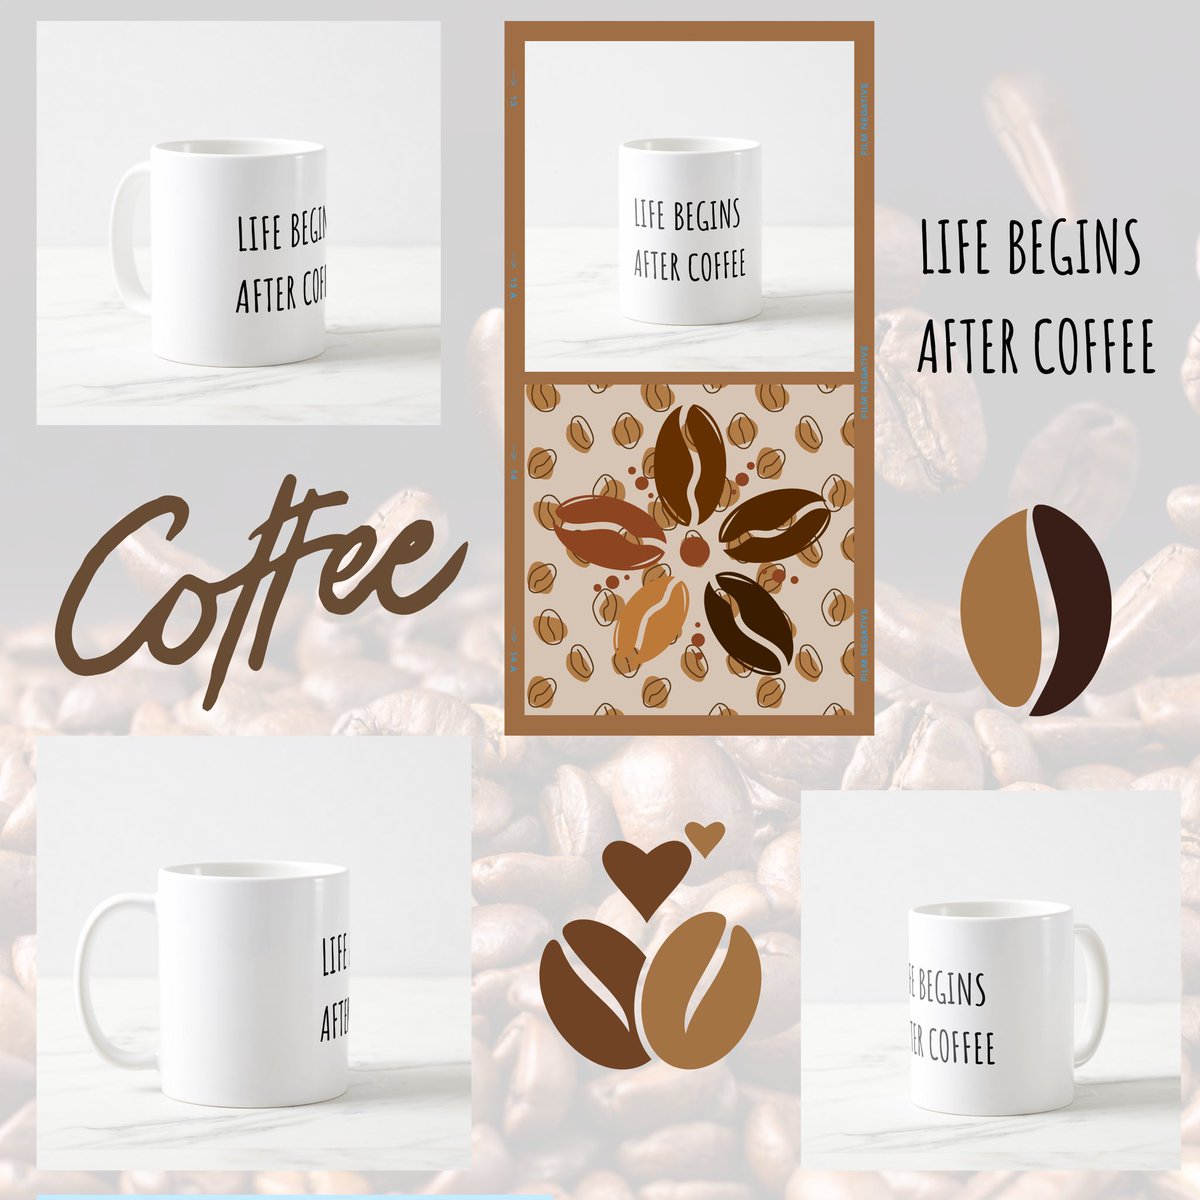 Funny Coffee Lover Mugs Gifts For Coffee Lovers zazzle.co.uk/funny_coffee_l… via @zazzle Seize your coffee break & snag this personalized funny coffee mug today! ☕️ Check it out!
#coffeemug #coffeetime #coffeelover #CoffeeLovers #giftsforcoffeelovers #funnycoffeemugs #funnycoffeemug